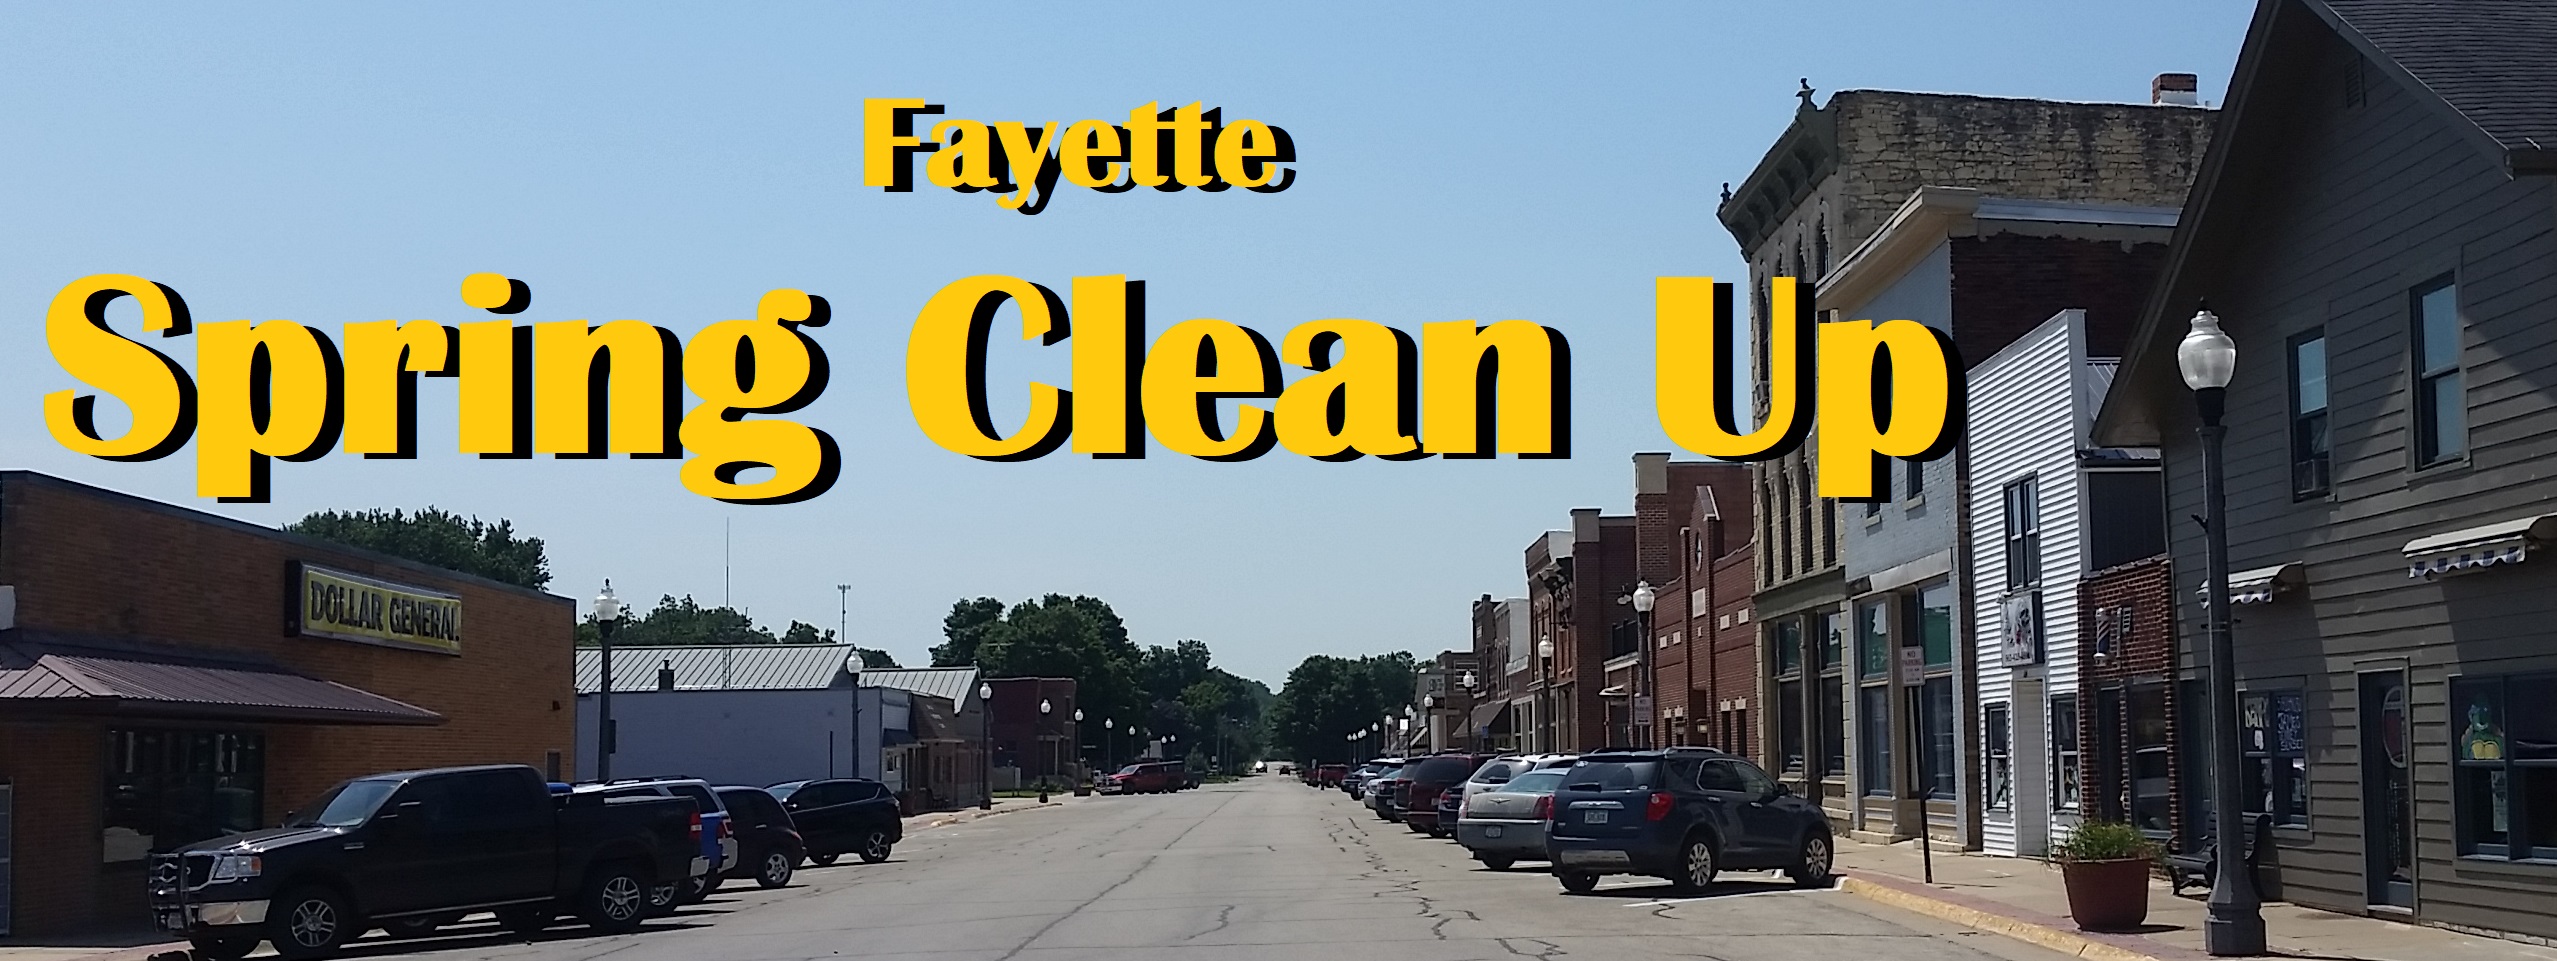 Fayette Spring CleanUp Day June 4, 2020